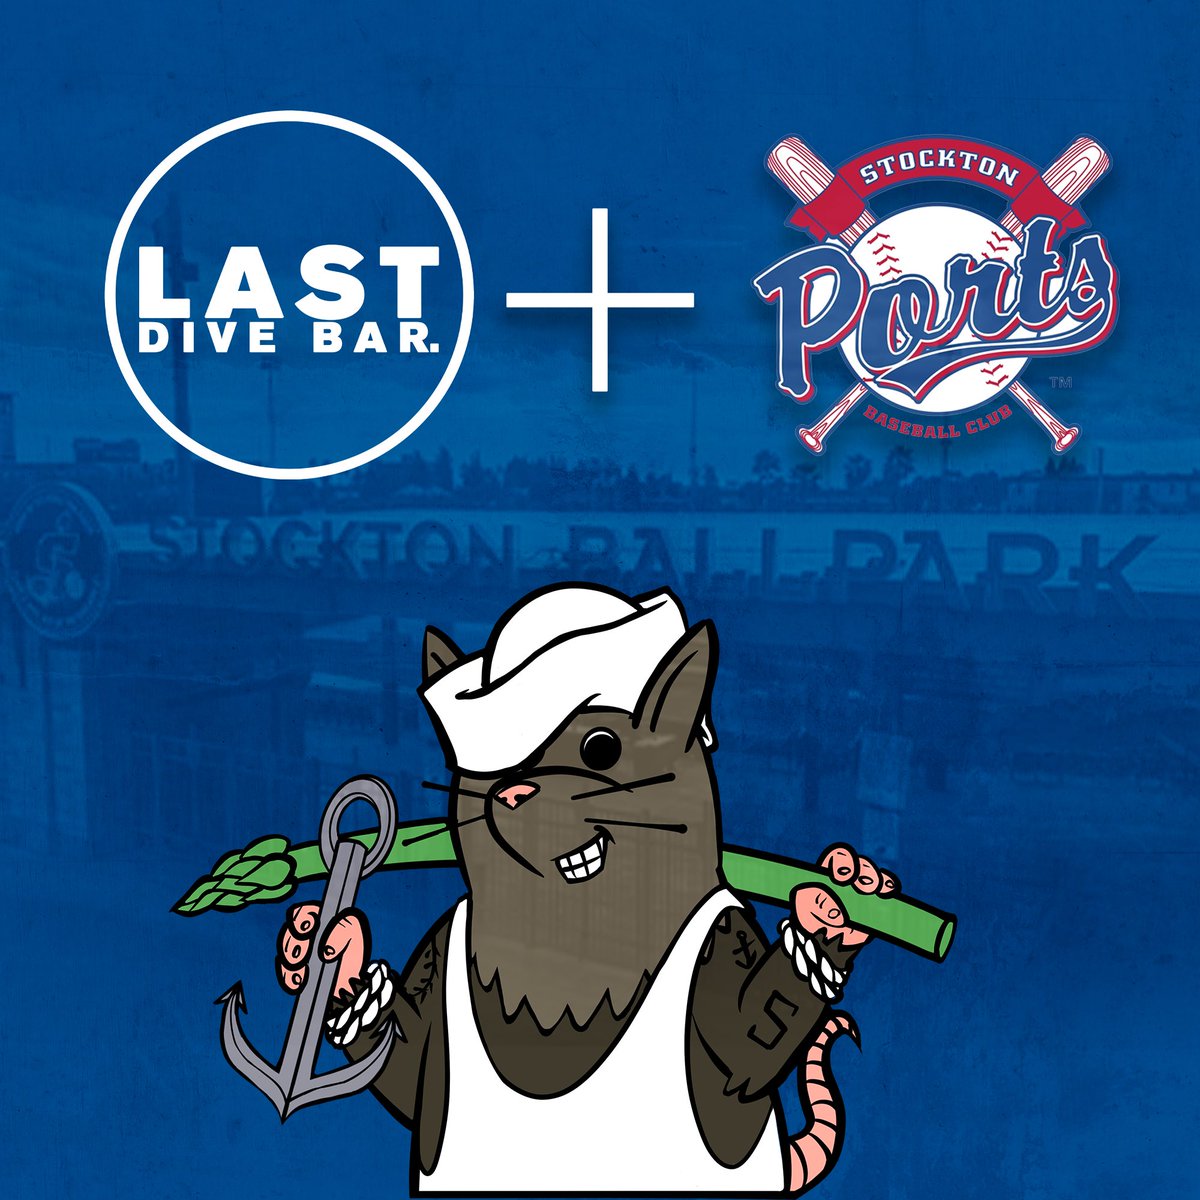 We at LDB never thought when we started that we’d ever be a sponsoring partner of a professional baseball team. Today we announce that we have officially become a sponsoring partner of the Stockton Ports. We believe in supporting teams that understand the value fans bring to